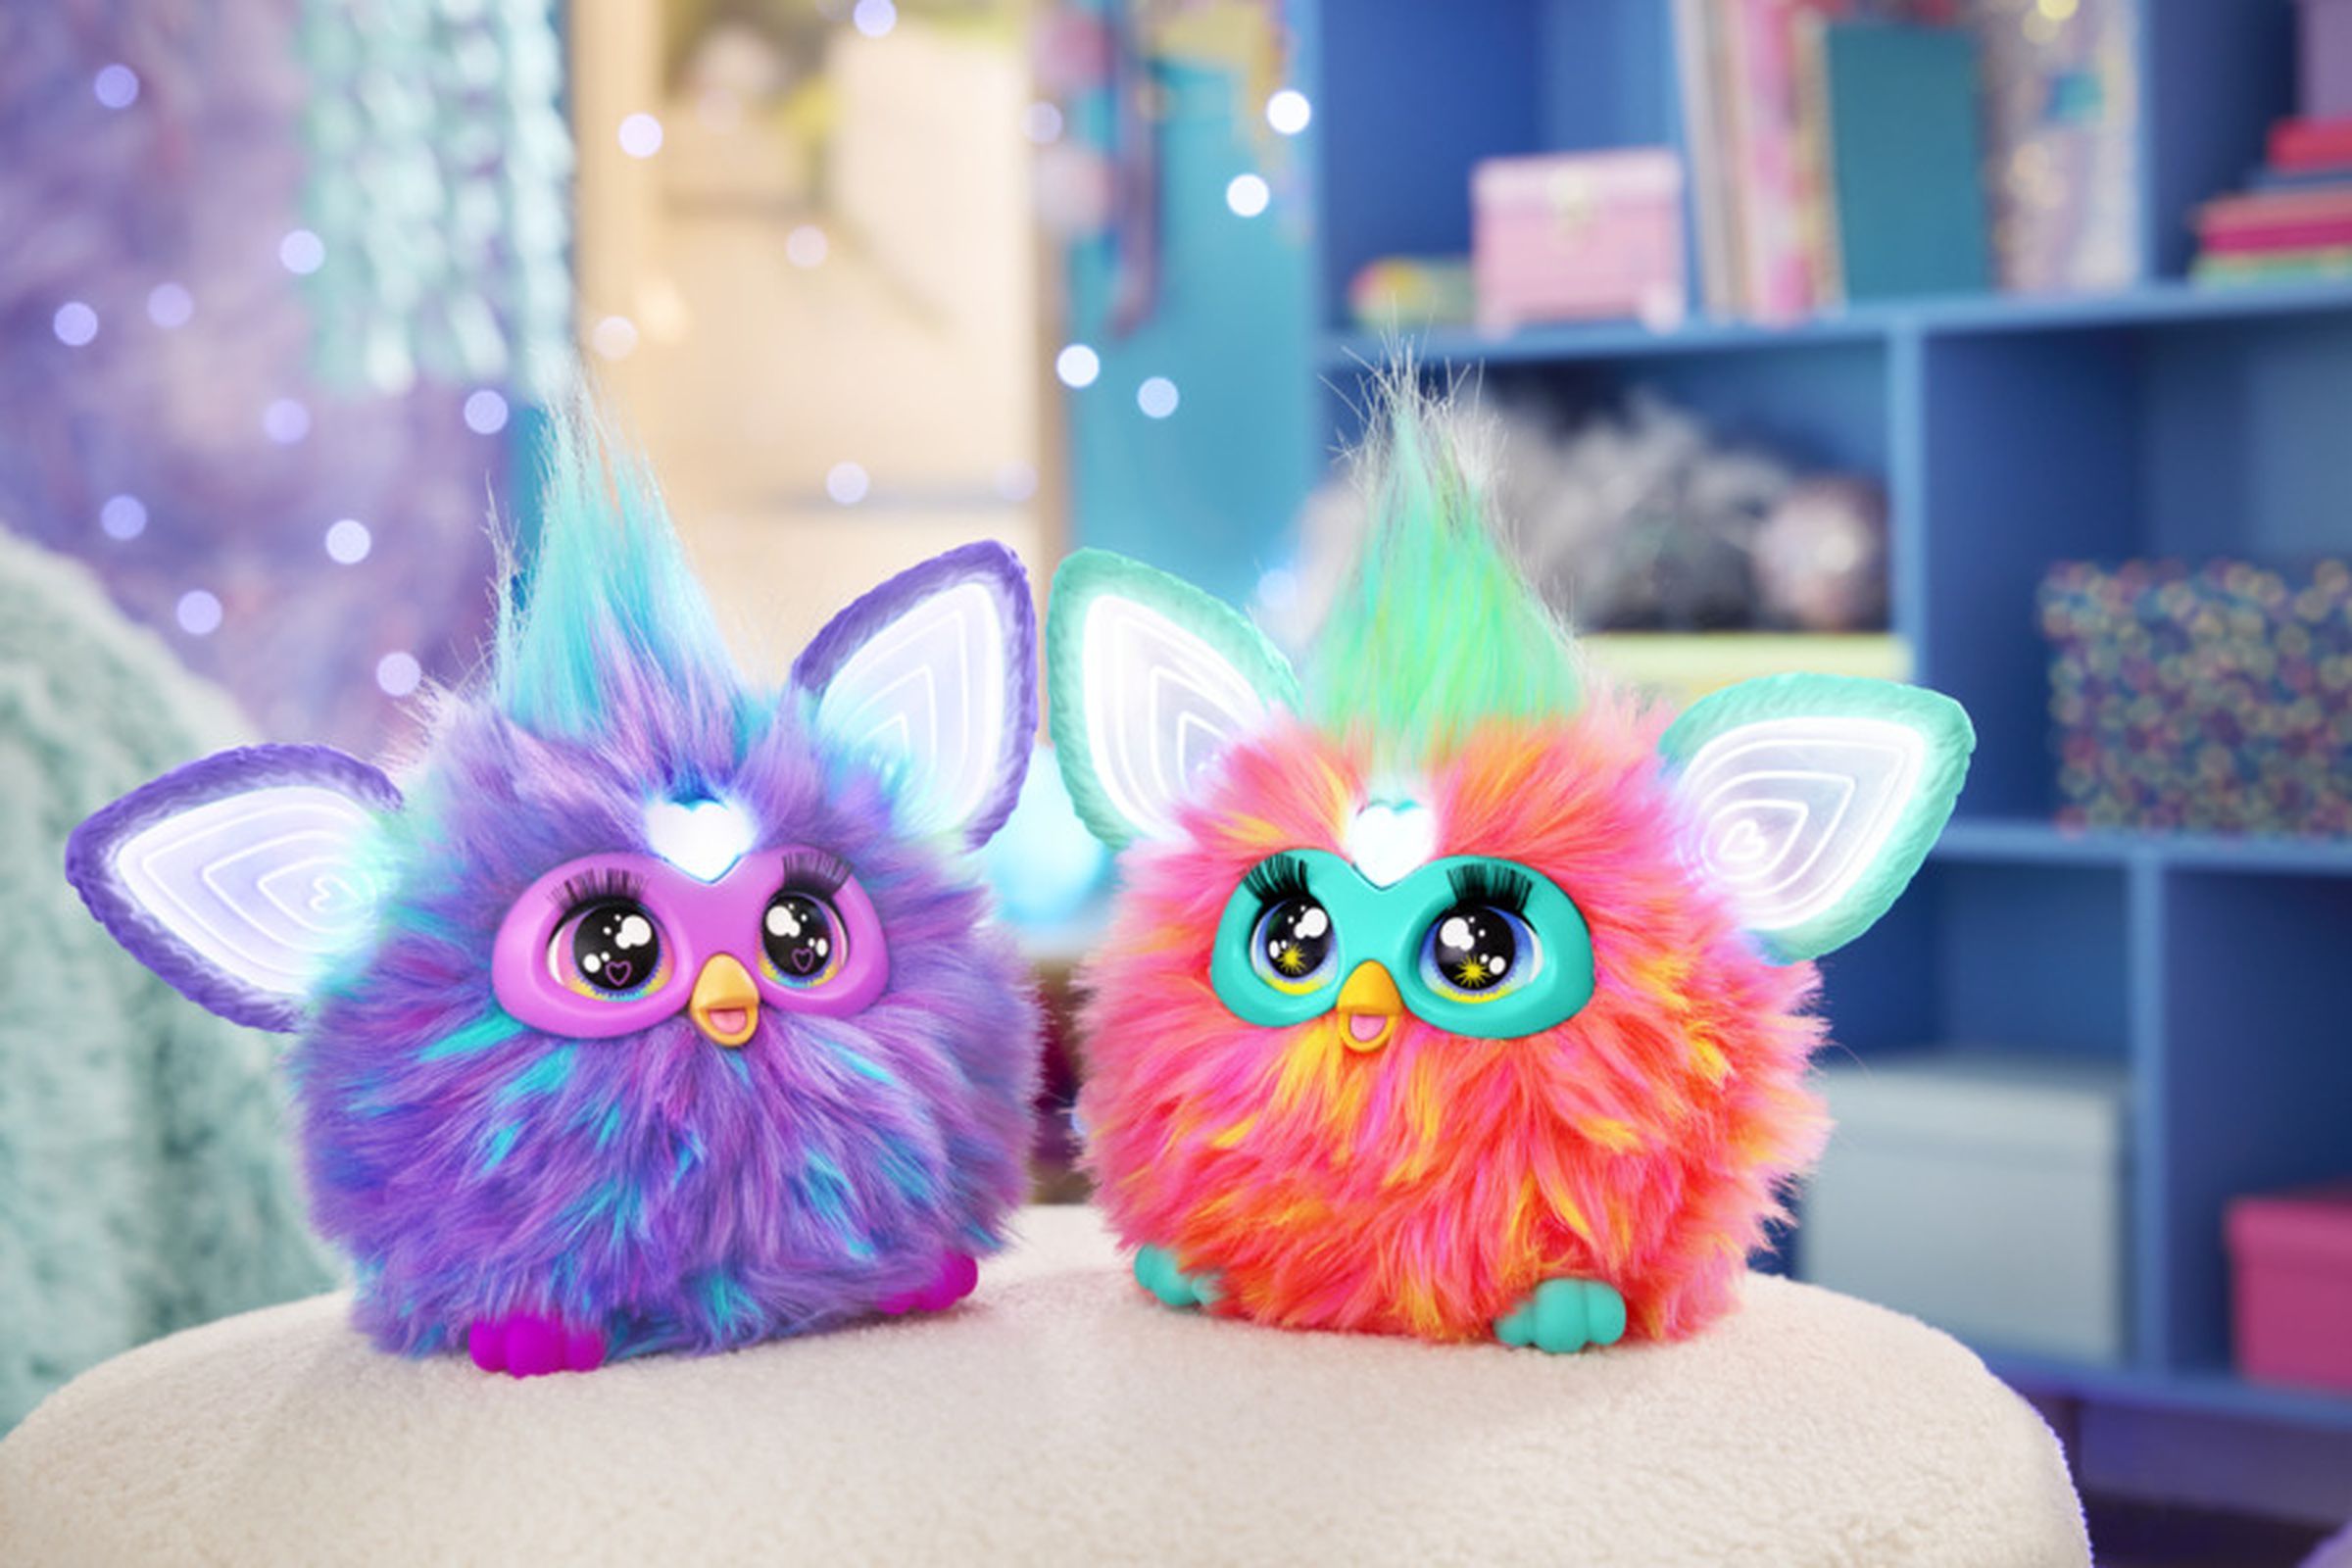 Two Furbys sit next to one another.